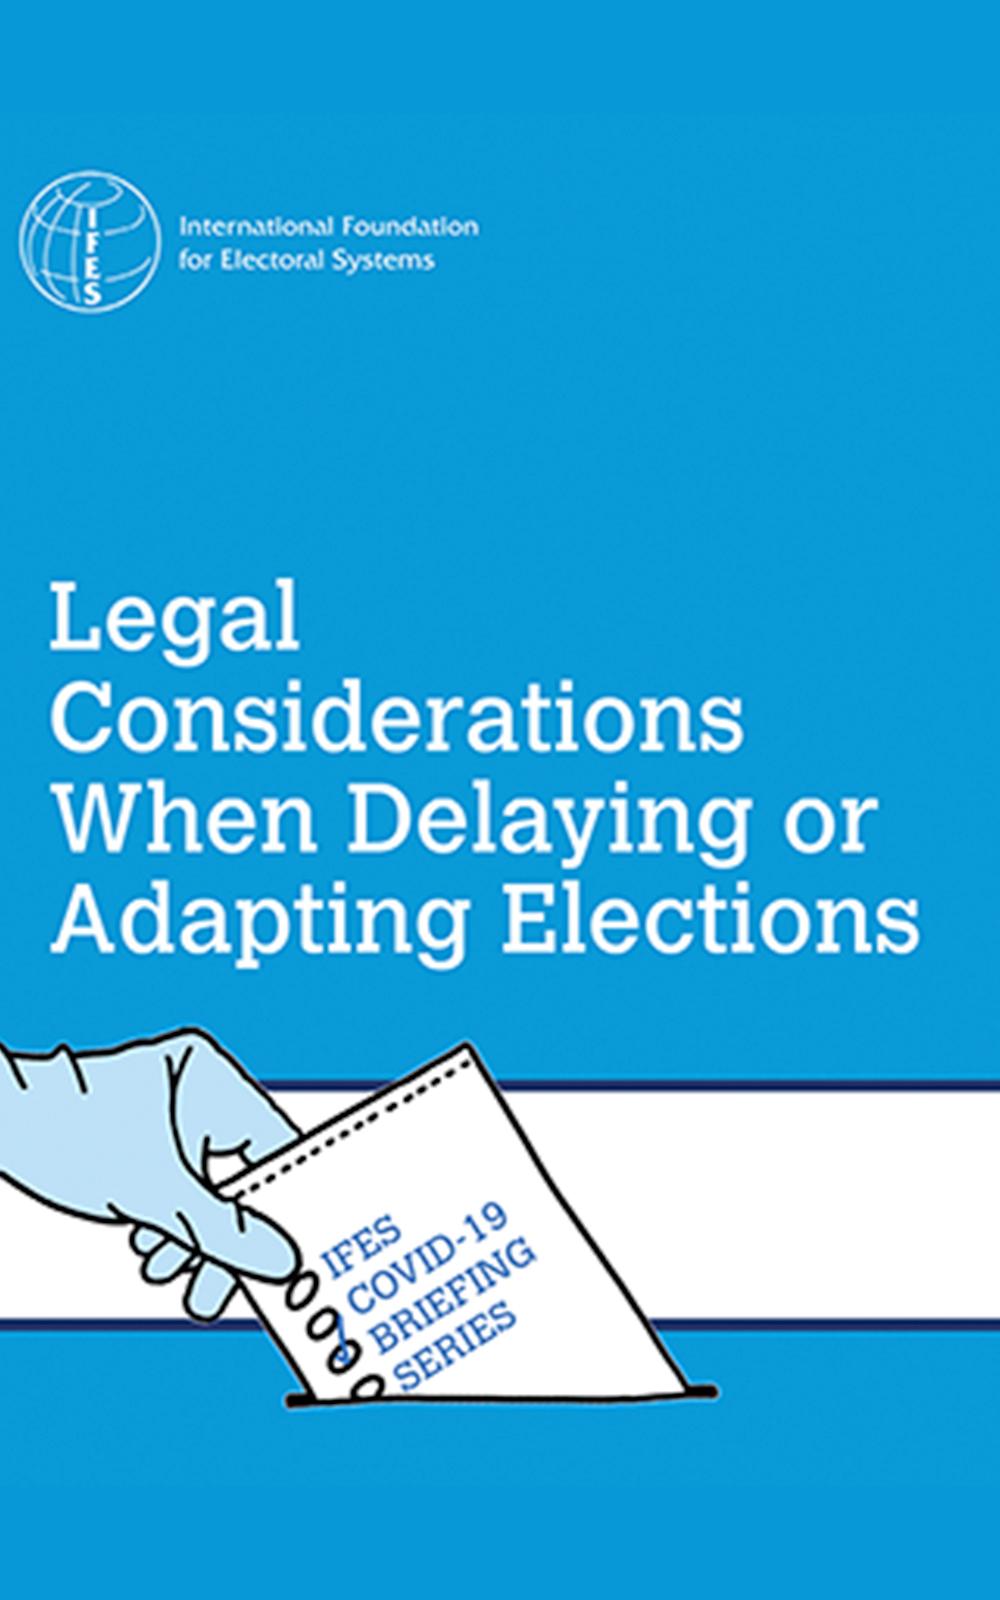 COVID-19 Legal Considerations When Delaying or Adapting Elections